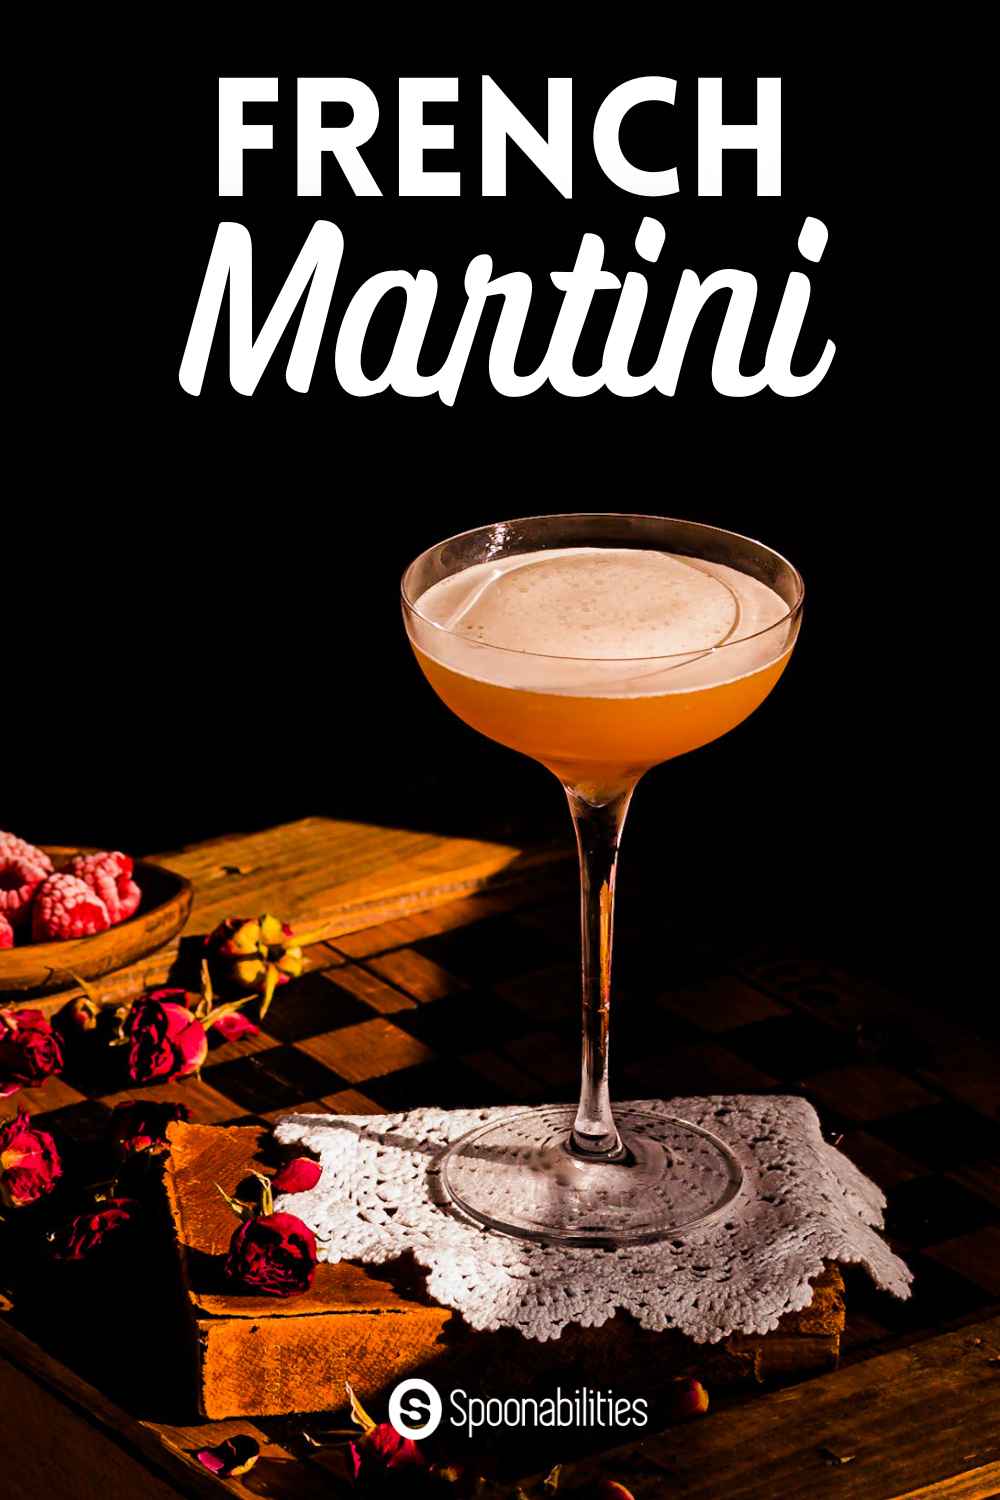 French martini in a cocktail glass